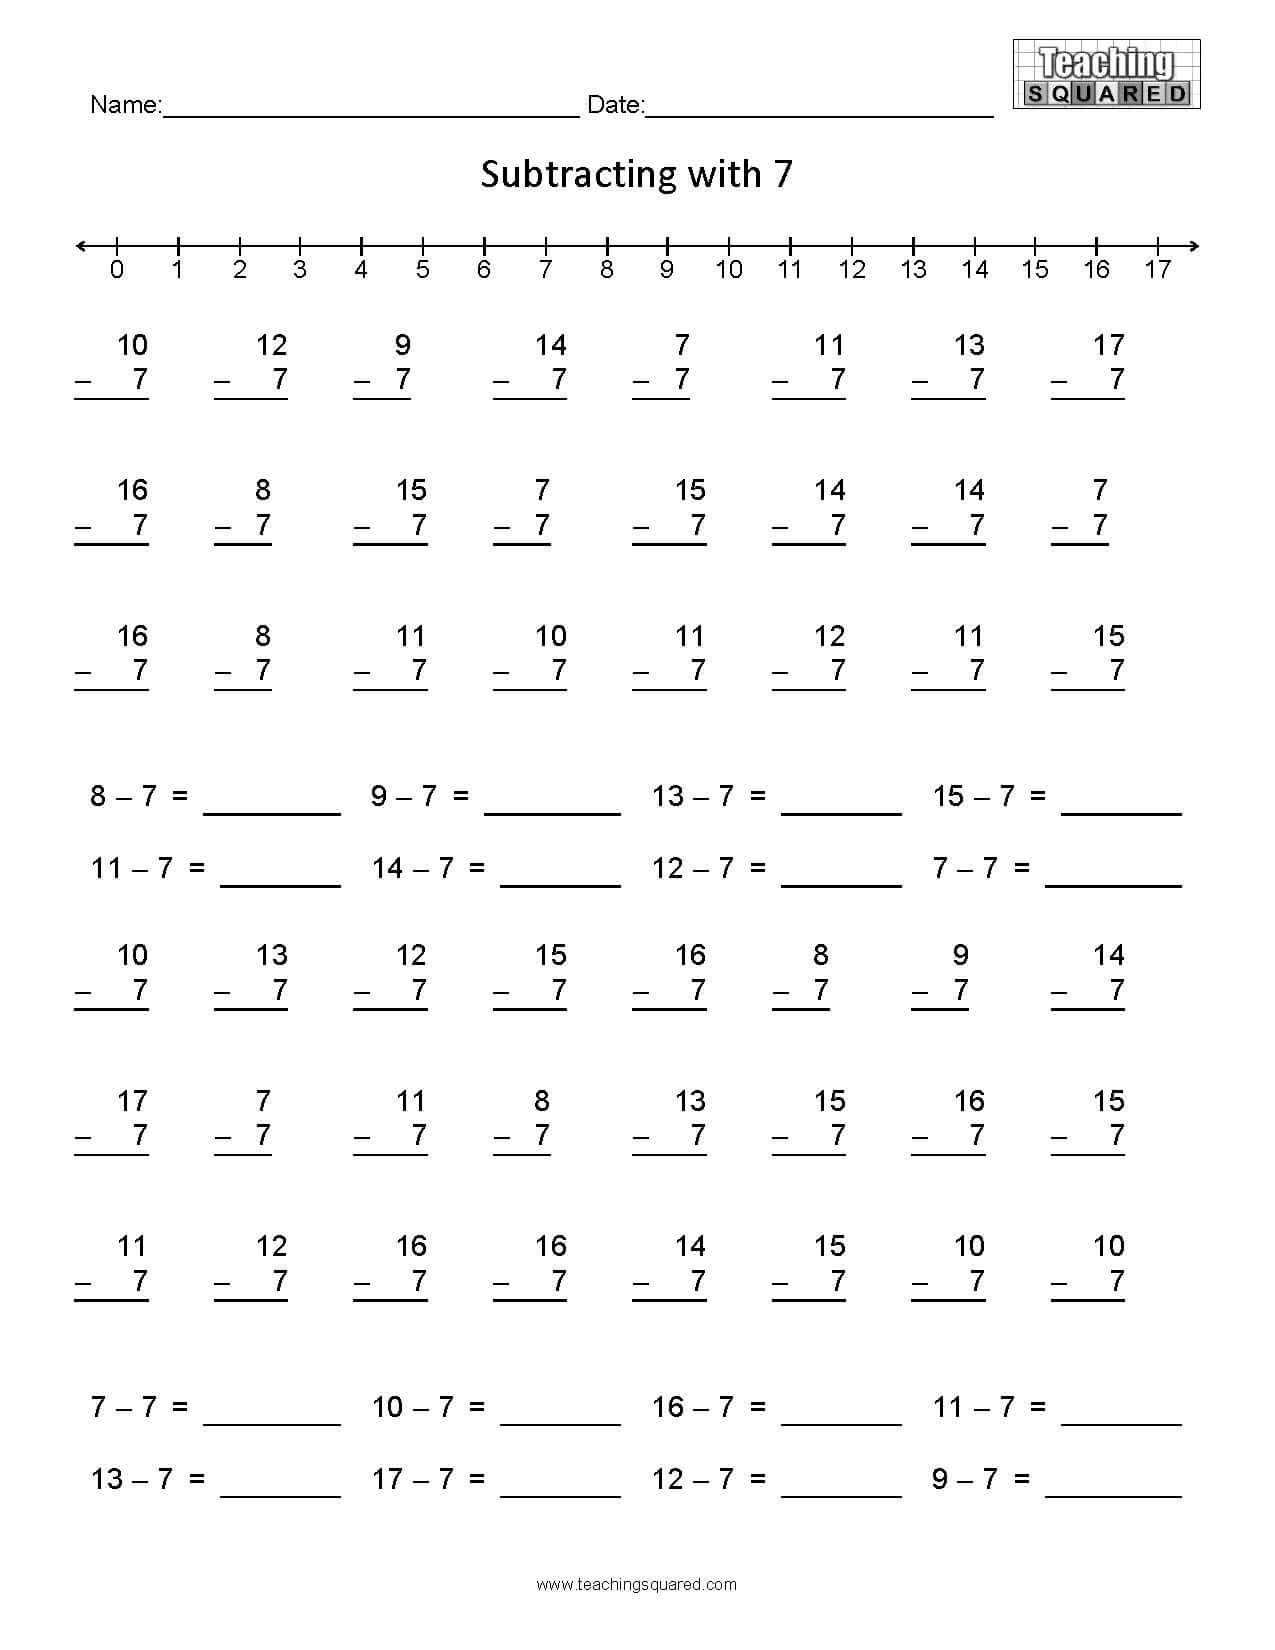 Subtracting with 1 math worksheets teaching